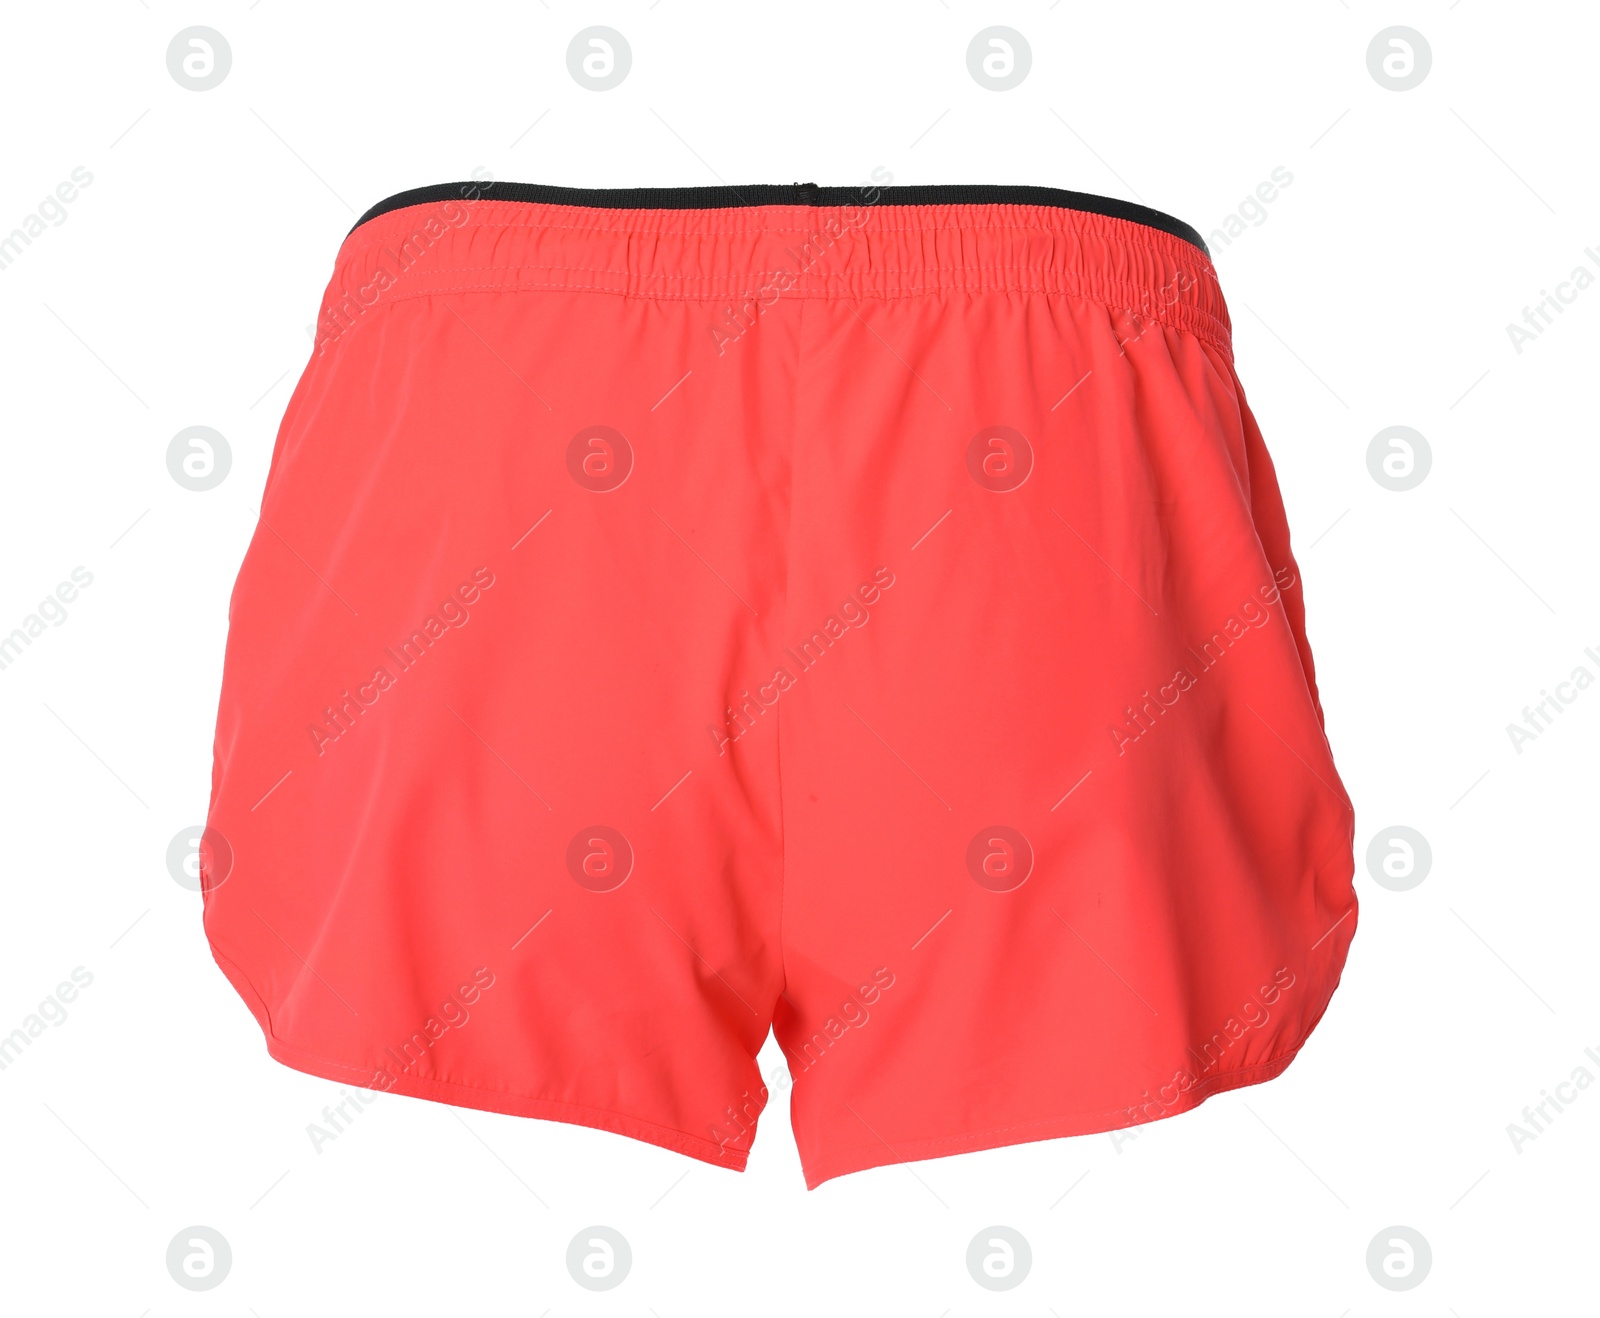 Photo of Coral women's shorts isolated on white. Sports clothing